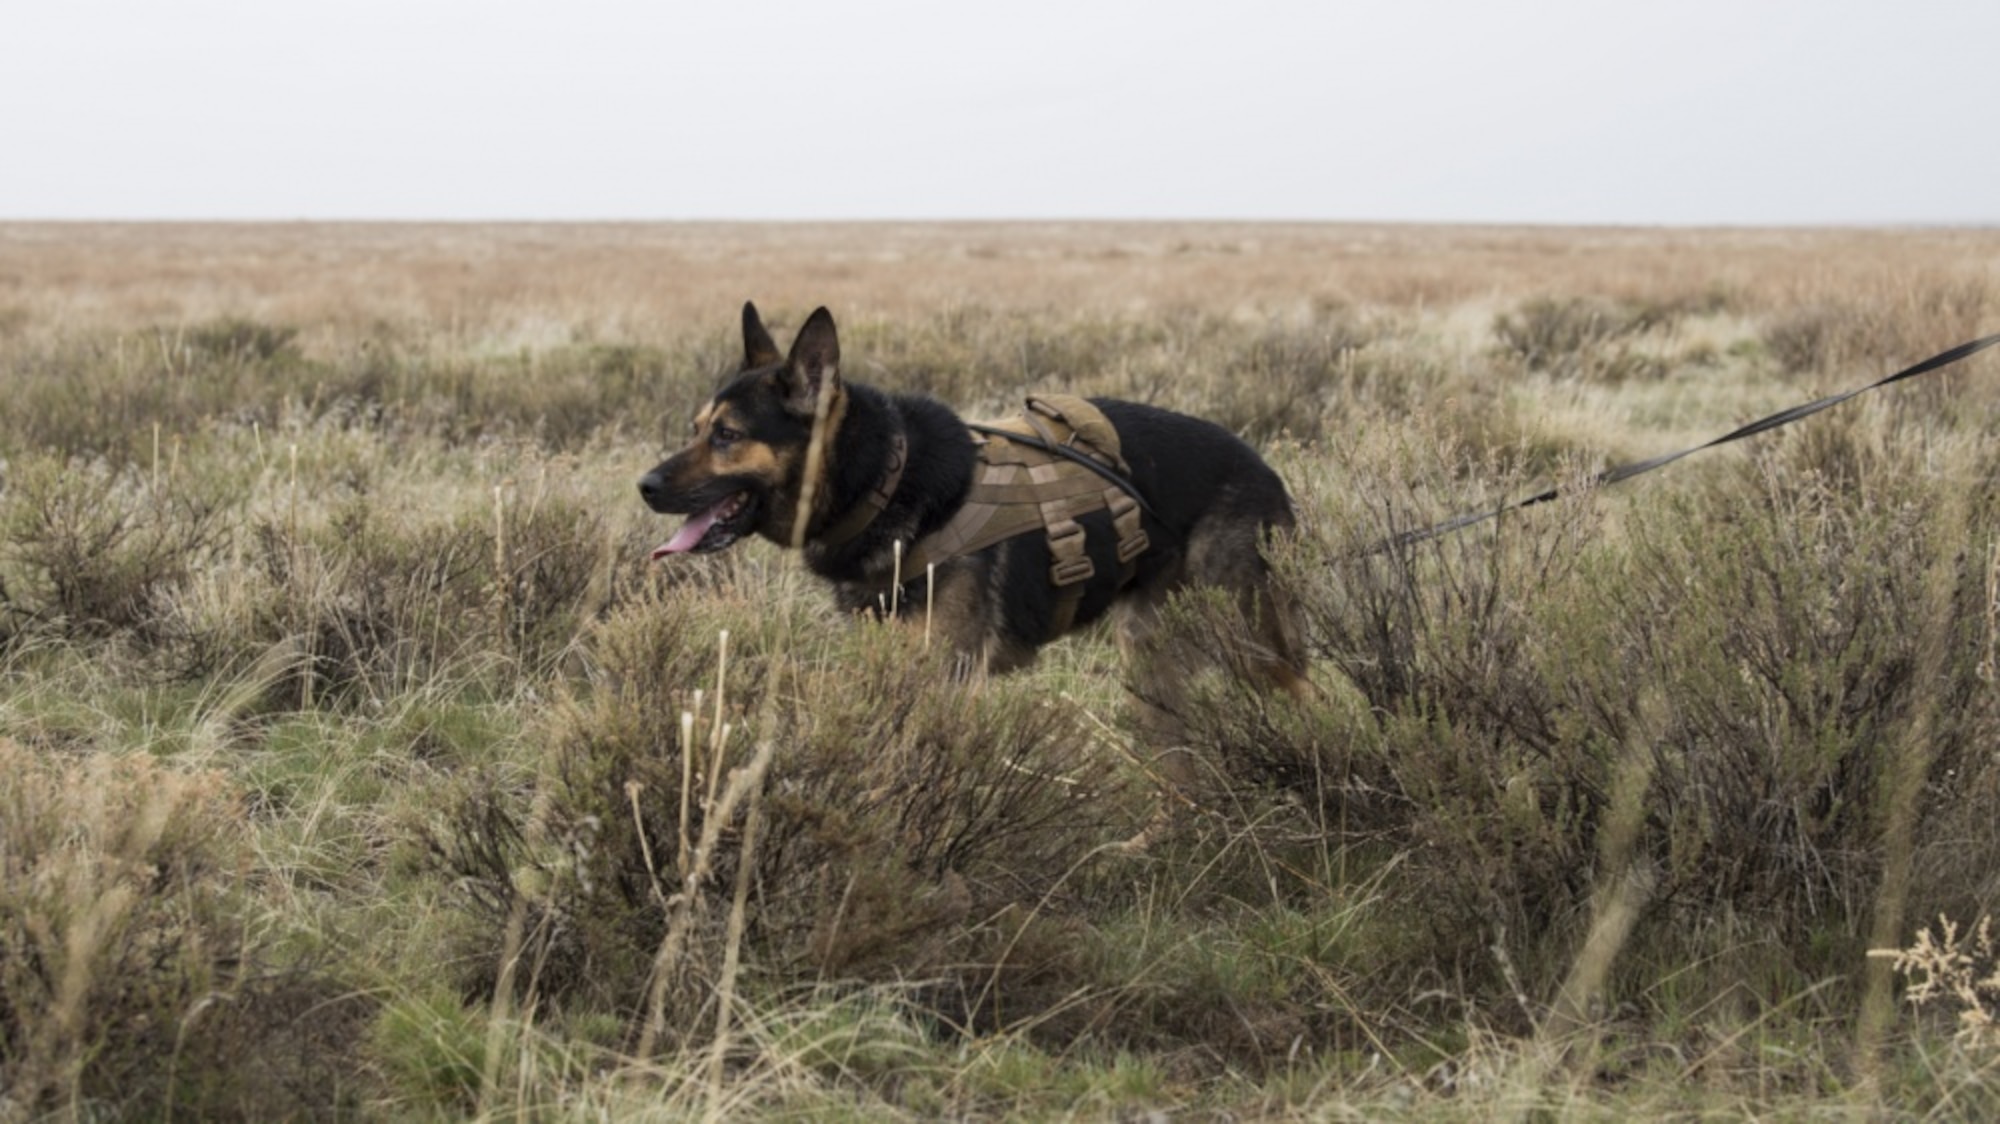 U.S. Air Force Alf, 366th Security Forces Squadron military working dog, acts as opposition forces and hunts down “crashed” pilots during a combat search and rescue exercise April 2, 2019 at Saylor Creek Range near Mountain Home Air Force Base, Idaho. This is one aspect of the Gunfighter Flag exercise that tests the abilities of pilots to stay hidden until rescue arrives while military working dog trainers and their dogs hone their tracking ability in an expansive environment. (U.S. Air Force photo by Airman First Class Andrew Kobialka)